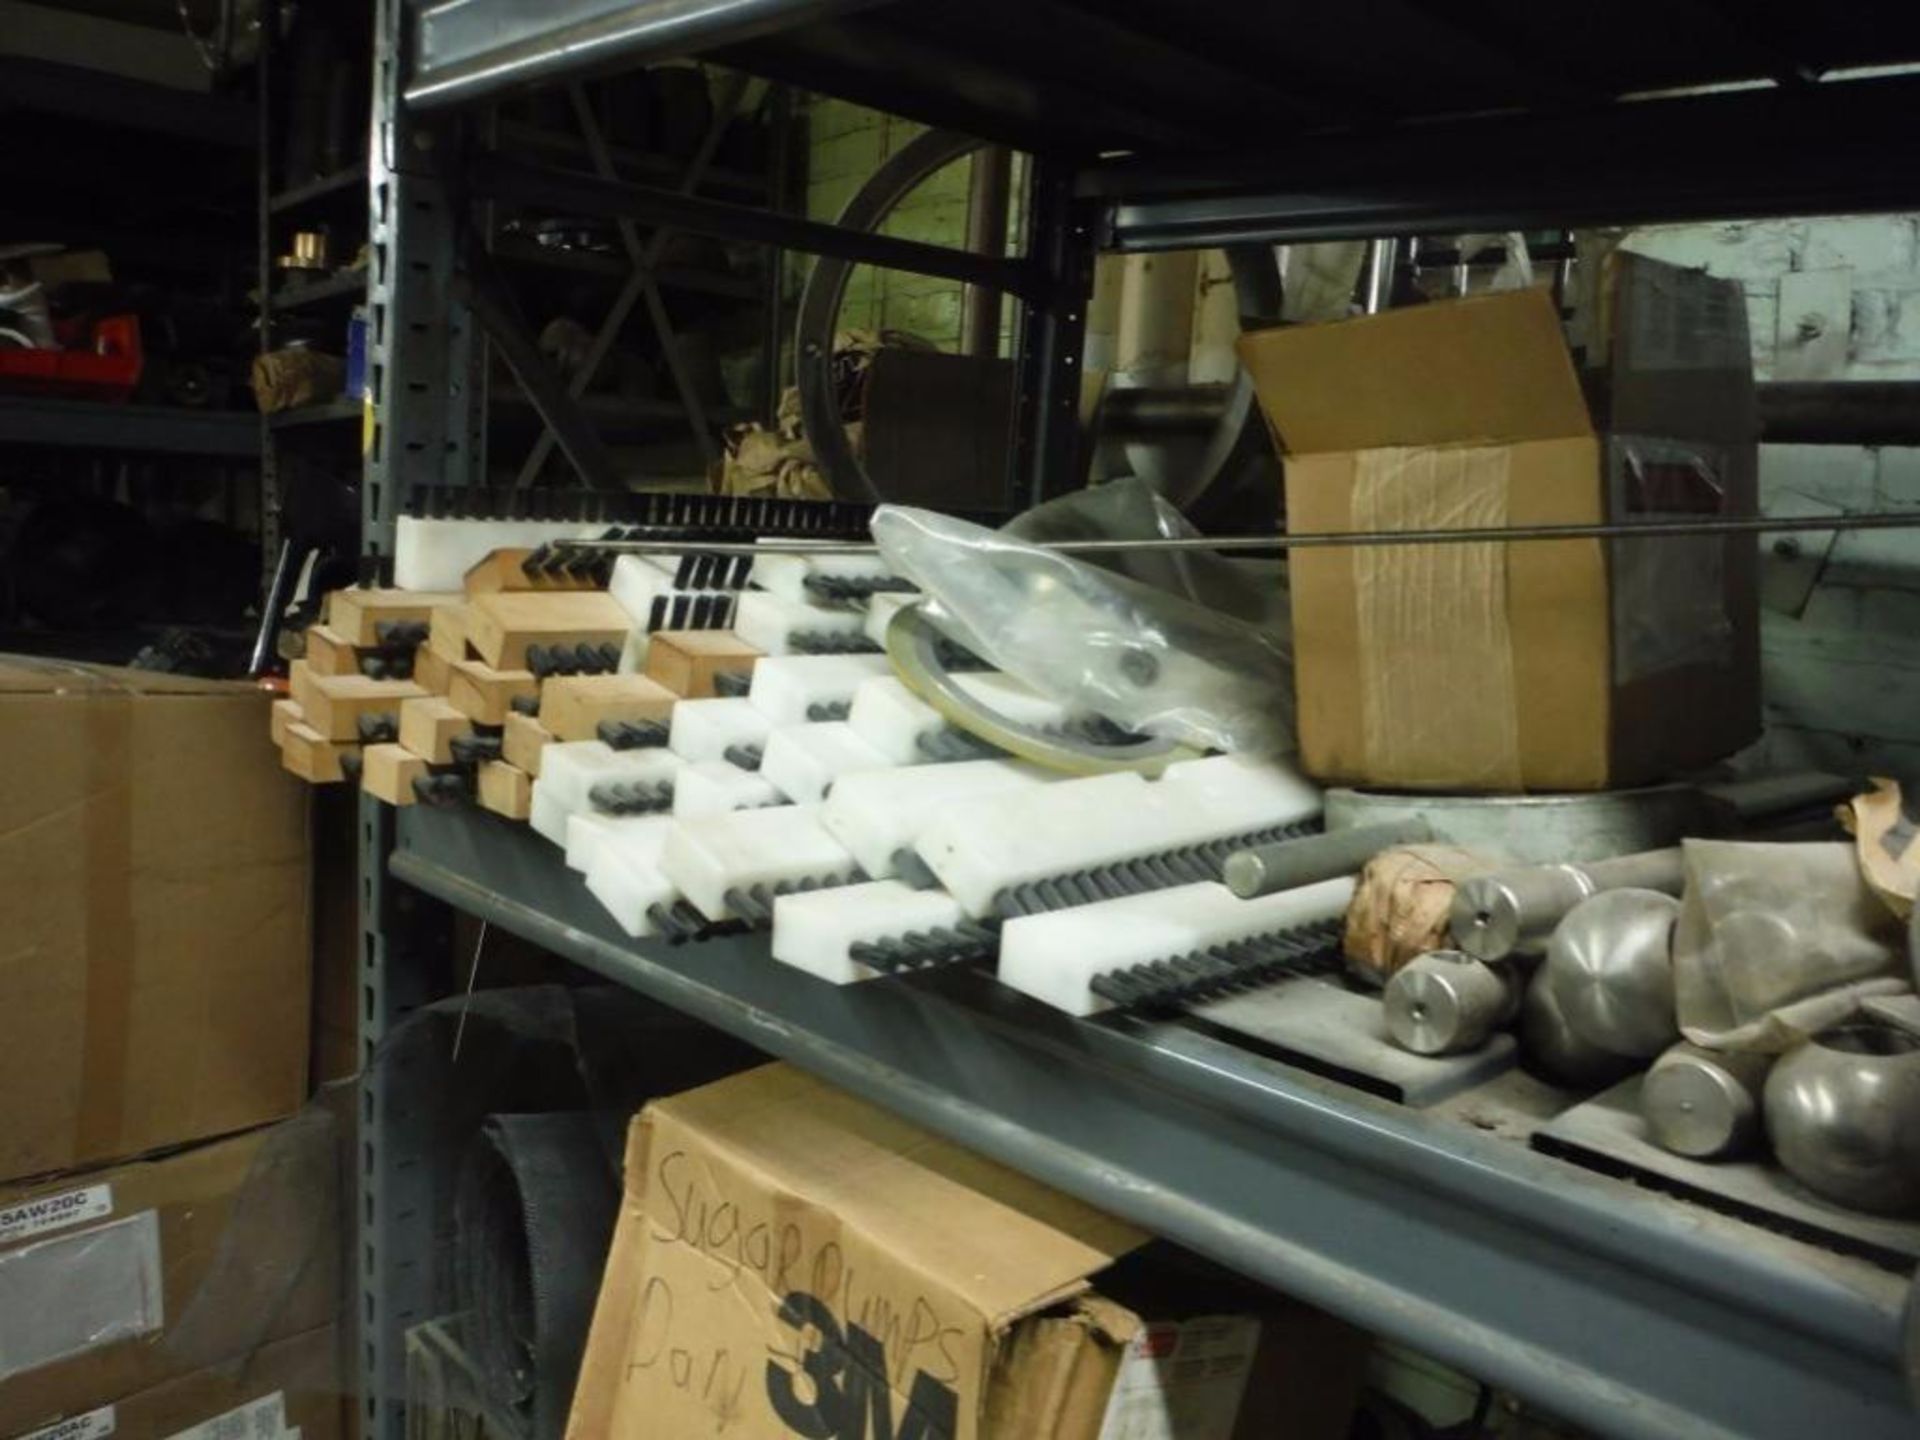 10 Shelves & content: Miscellaneous valves, fittings, brushes, and parts  Rigging Fee: $1000 - Image 4 of 14